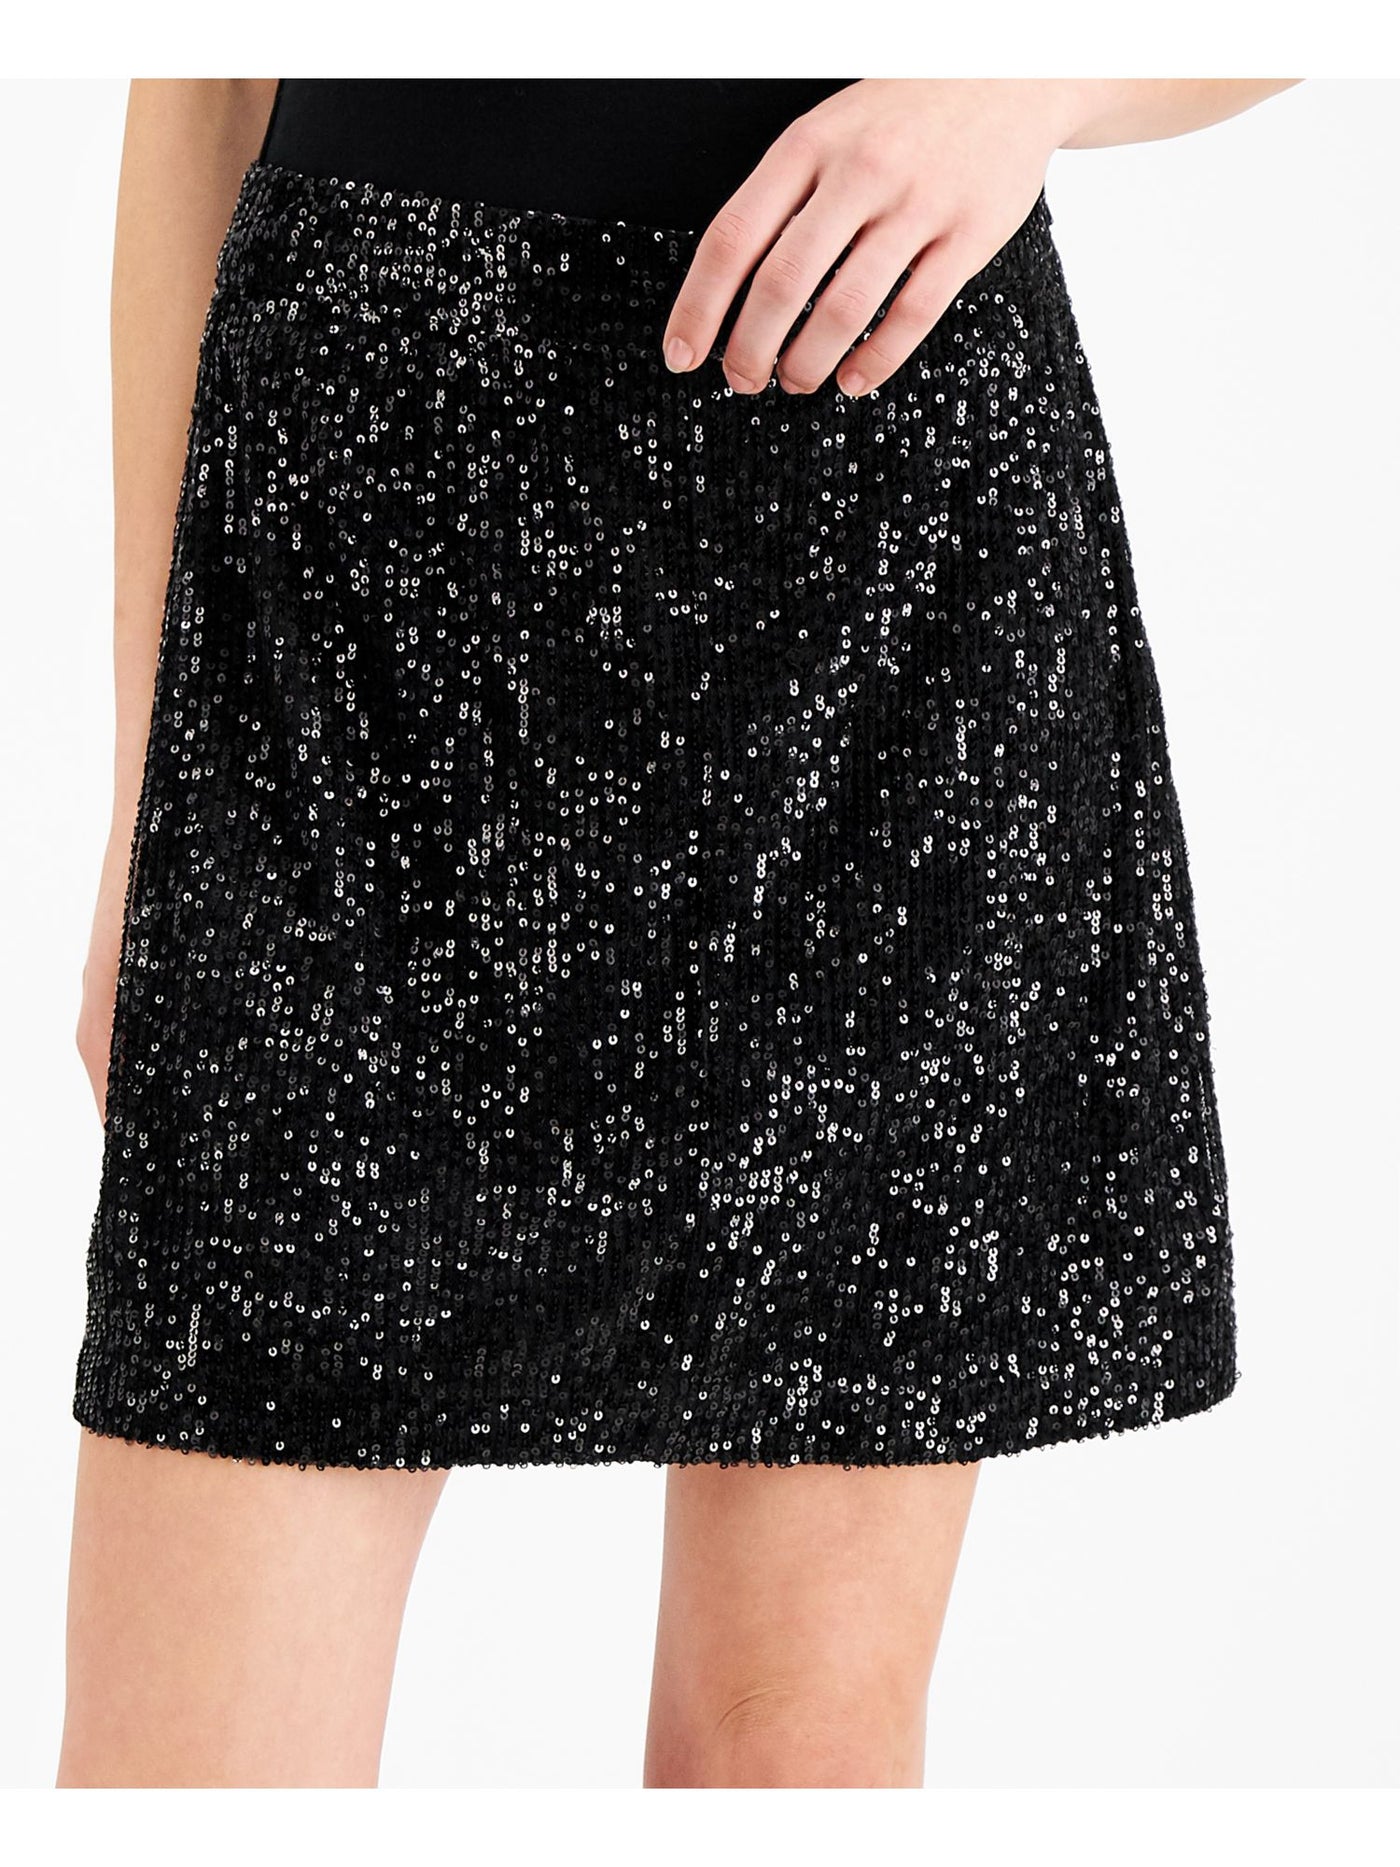 FRENCH CONNECTION Womens Black Sequined Zippered Lined Sheer Mini Cocktail A-Line Skirt 6